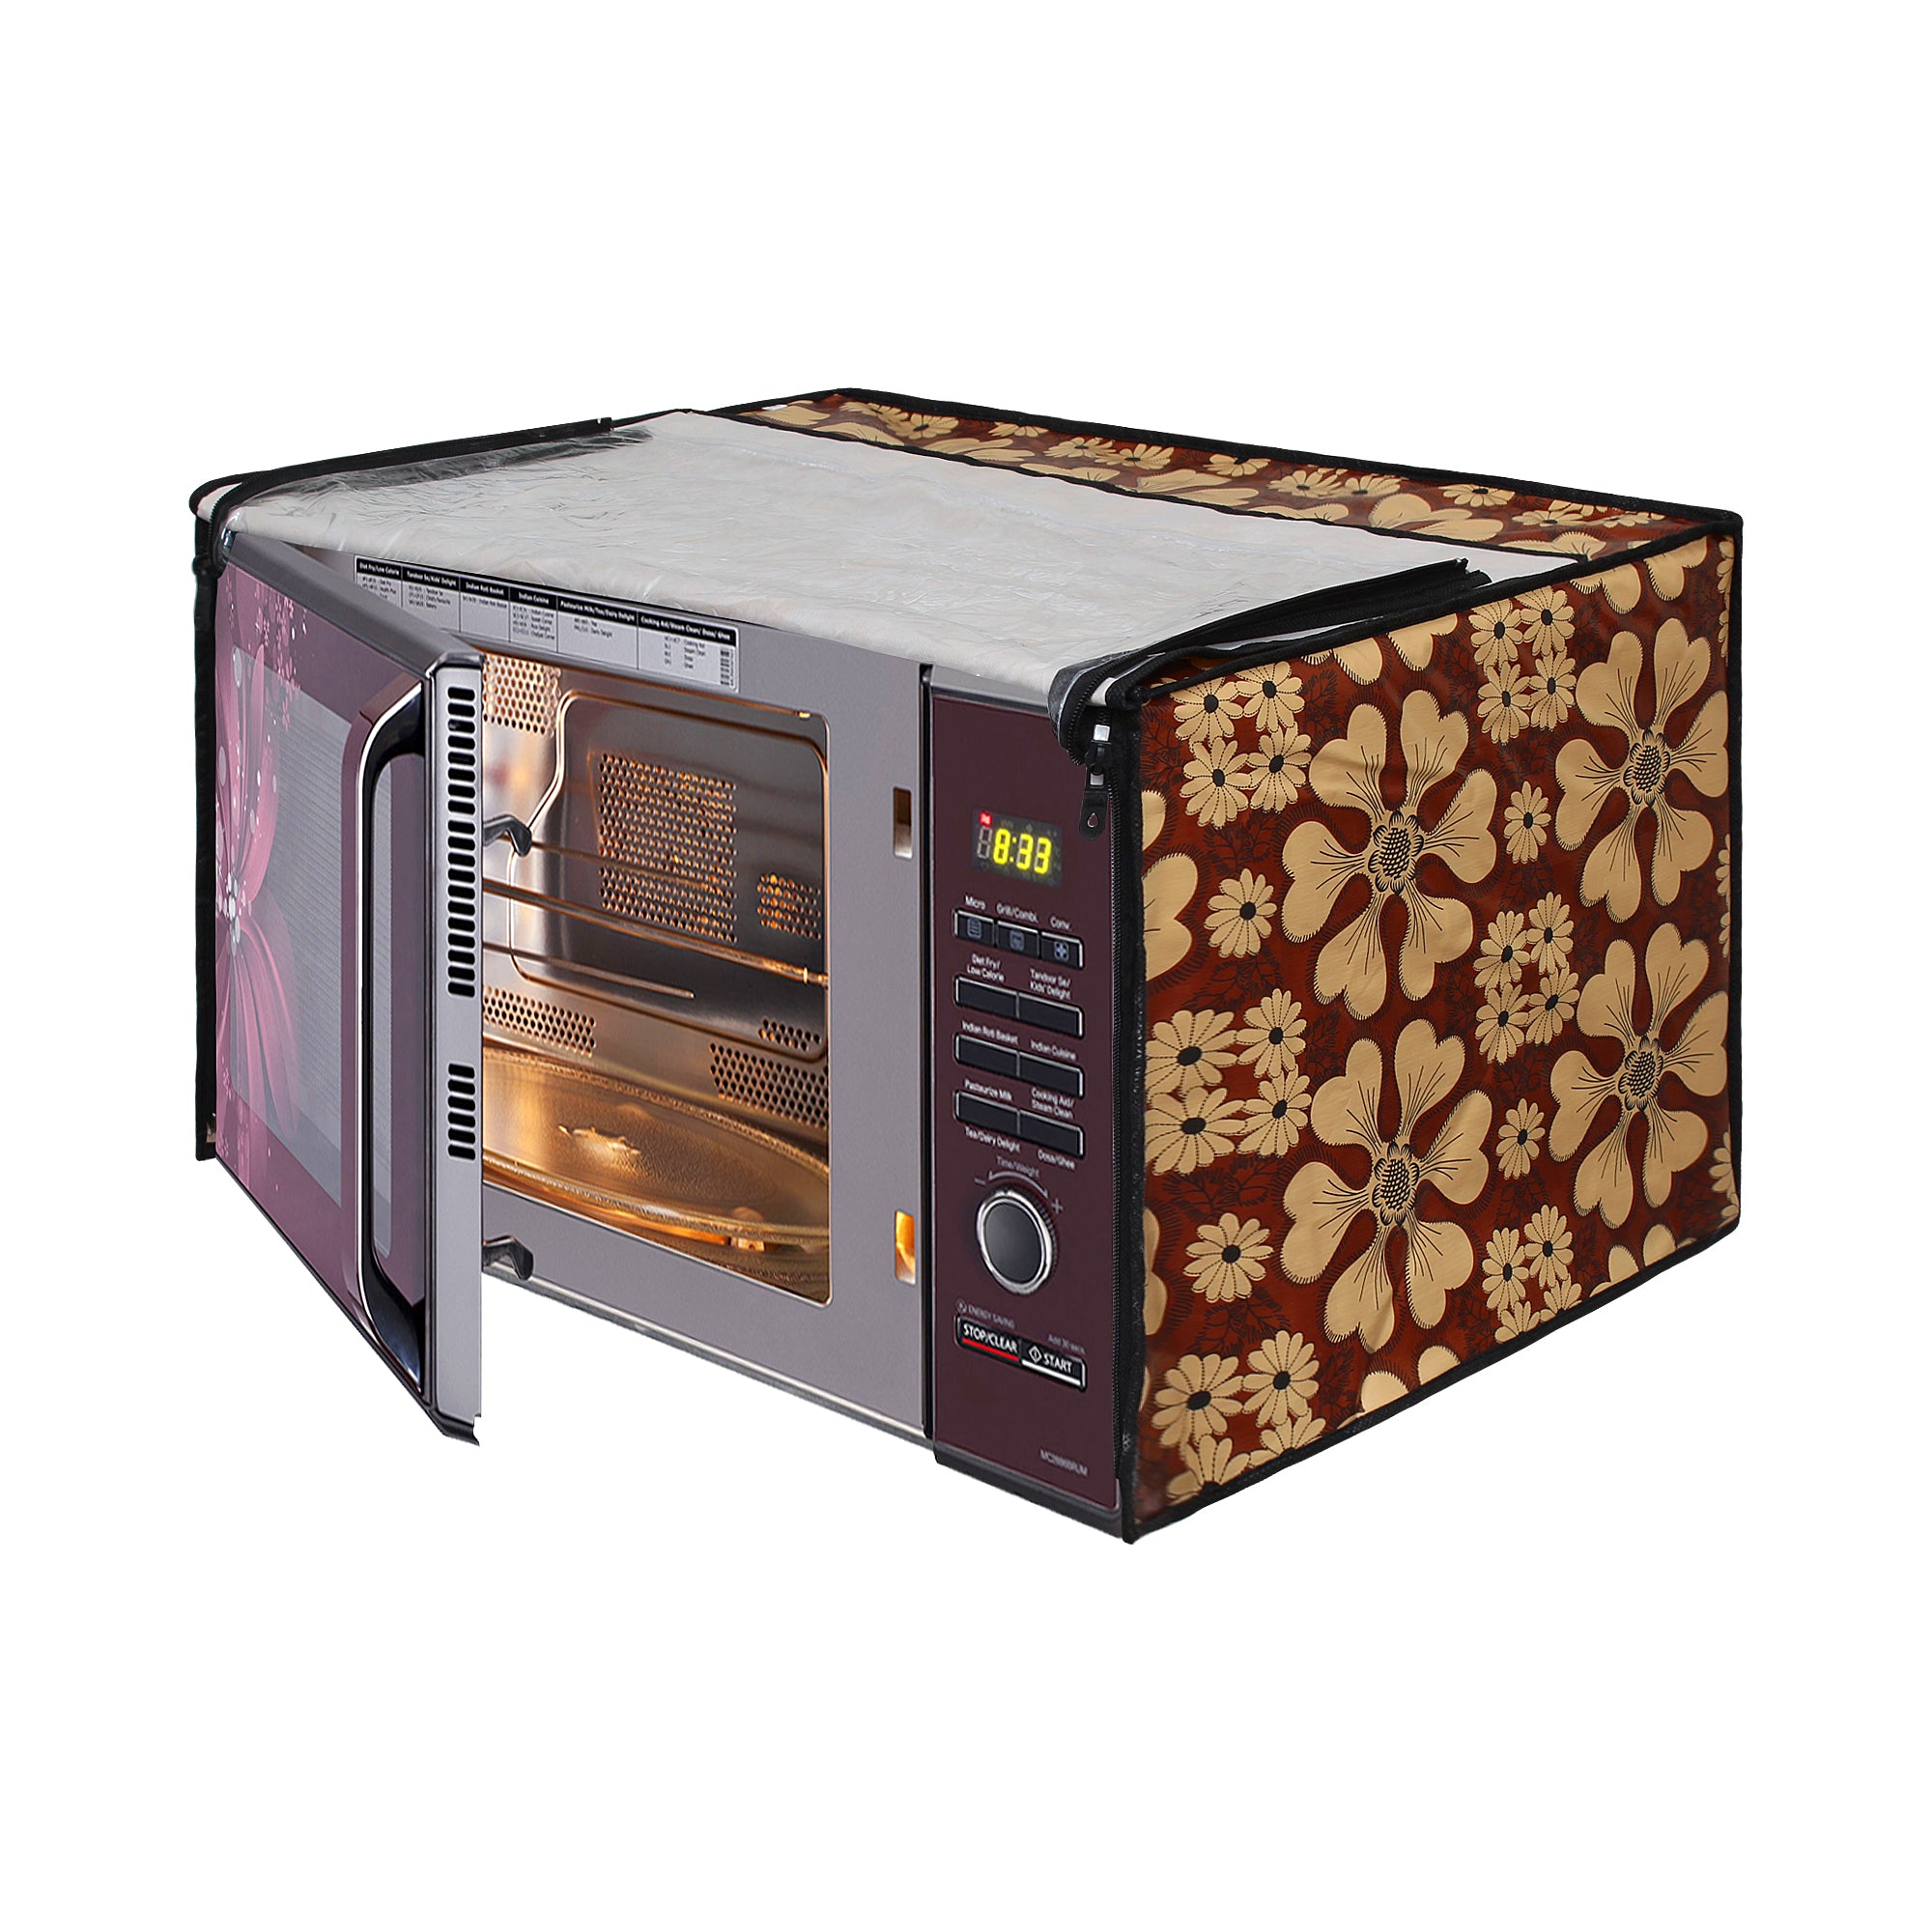 Microwave Oven Cover With Adjustable Front Zipper, SA62 - Dream Care Furnishings Private Limited